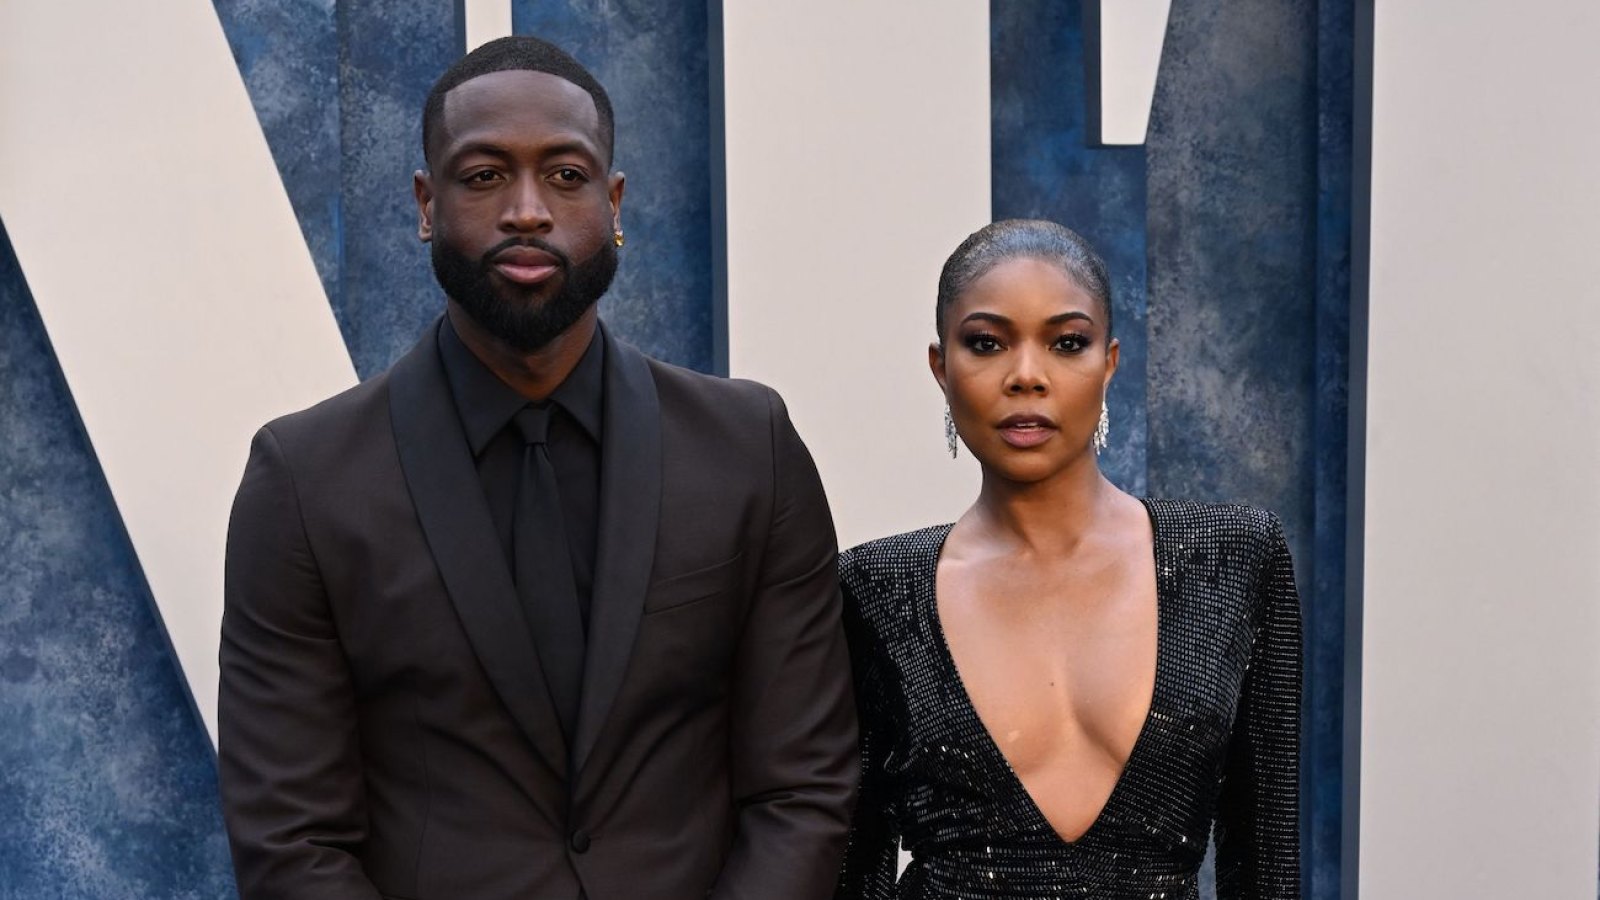 Dwyane Wade Reveals He Moved His Family Out of Florida